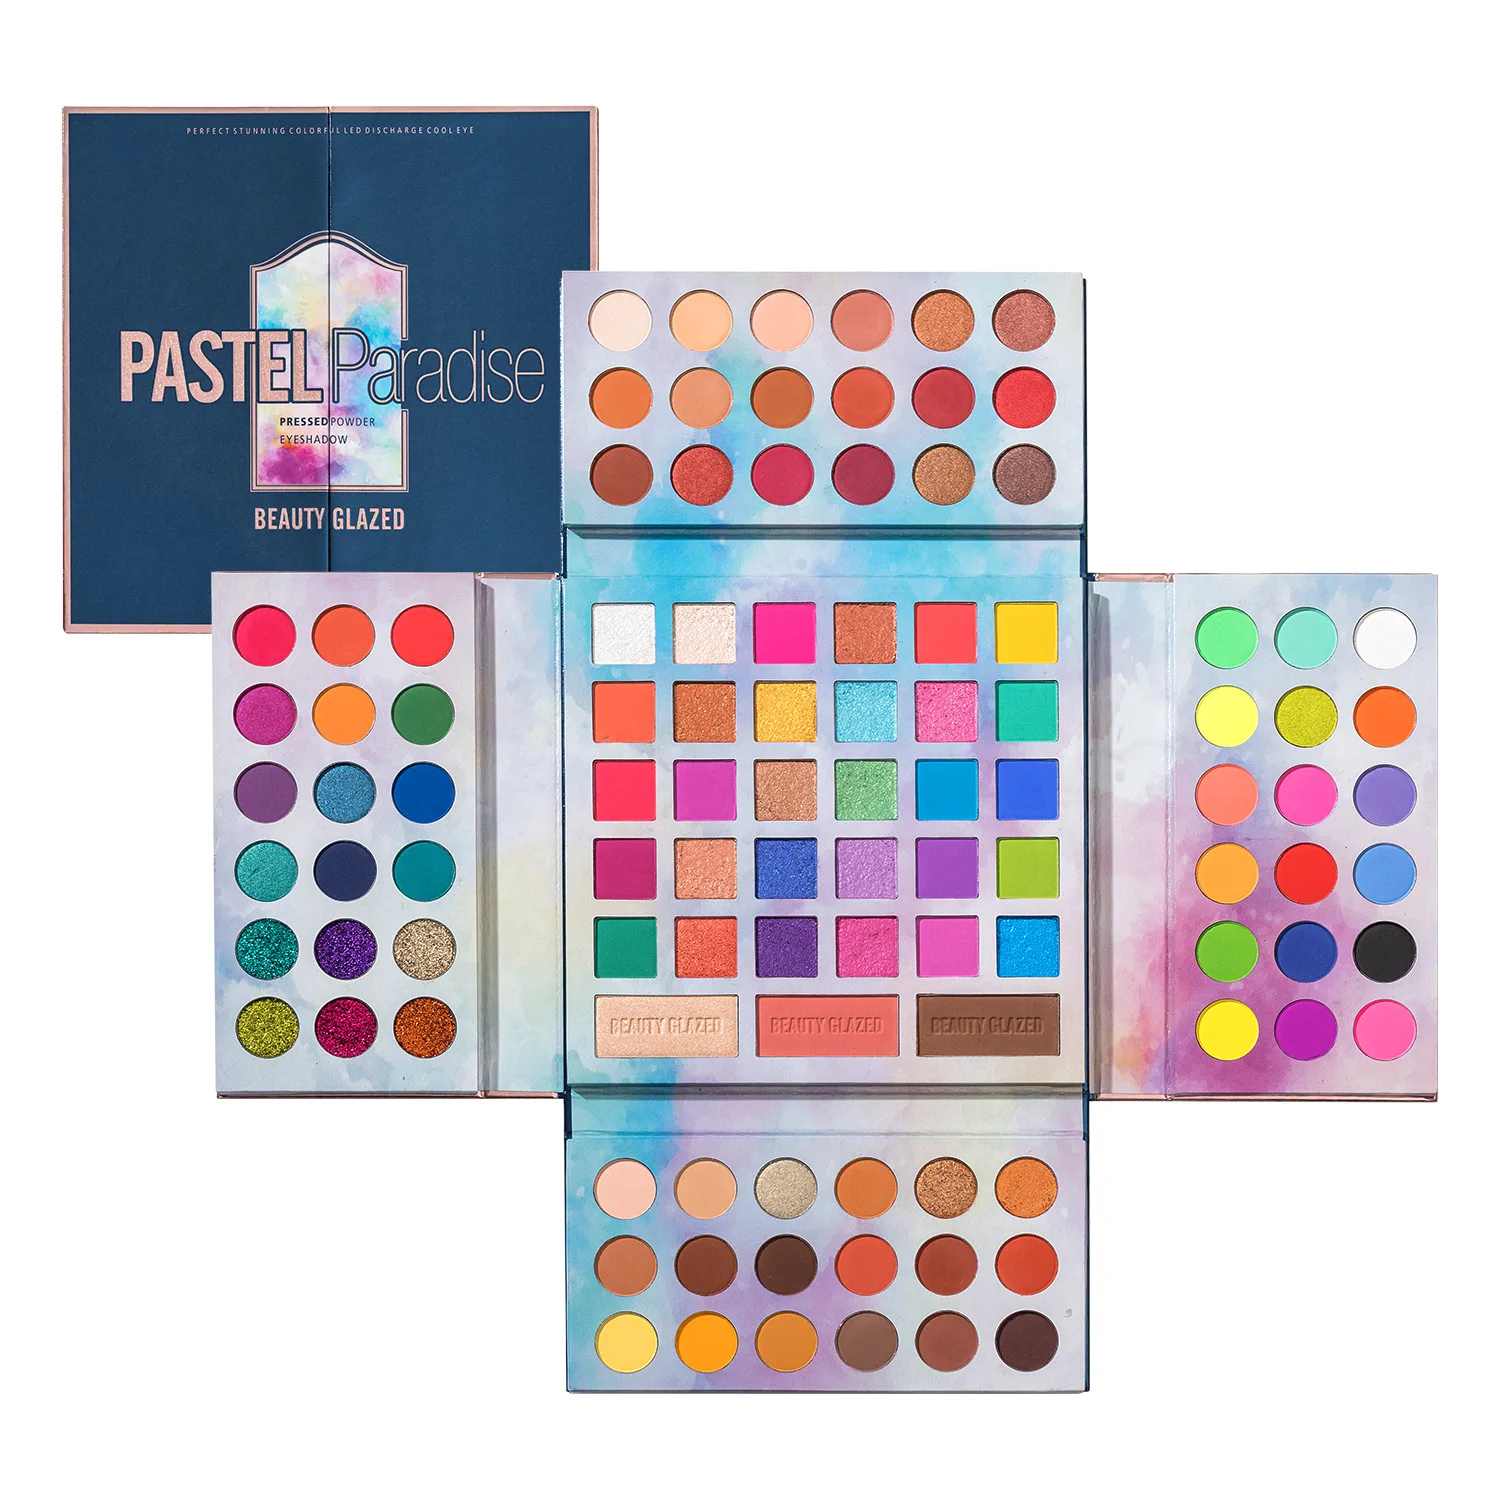 5 In 1 Beauty Glazed Eyeshadow 105 Colors Glitter Colorful Paradise Pressed Powder Shadows Palette Matte Shimmer Make Up Pallete